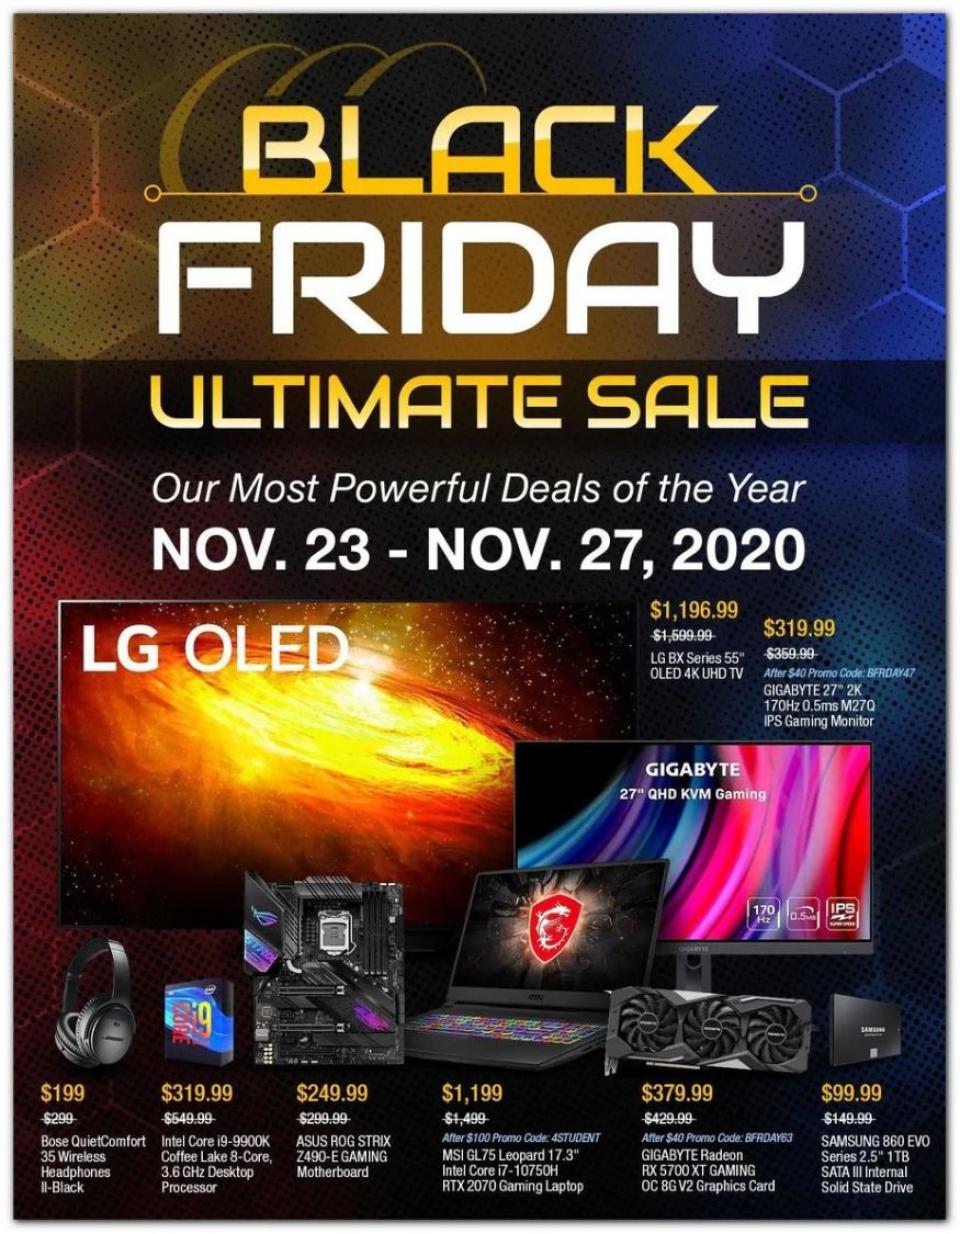 Newegg Black Friday Ad 2020 Ultimate Sale - WeeklyAds2 - How Are Black Friday Deals Possible